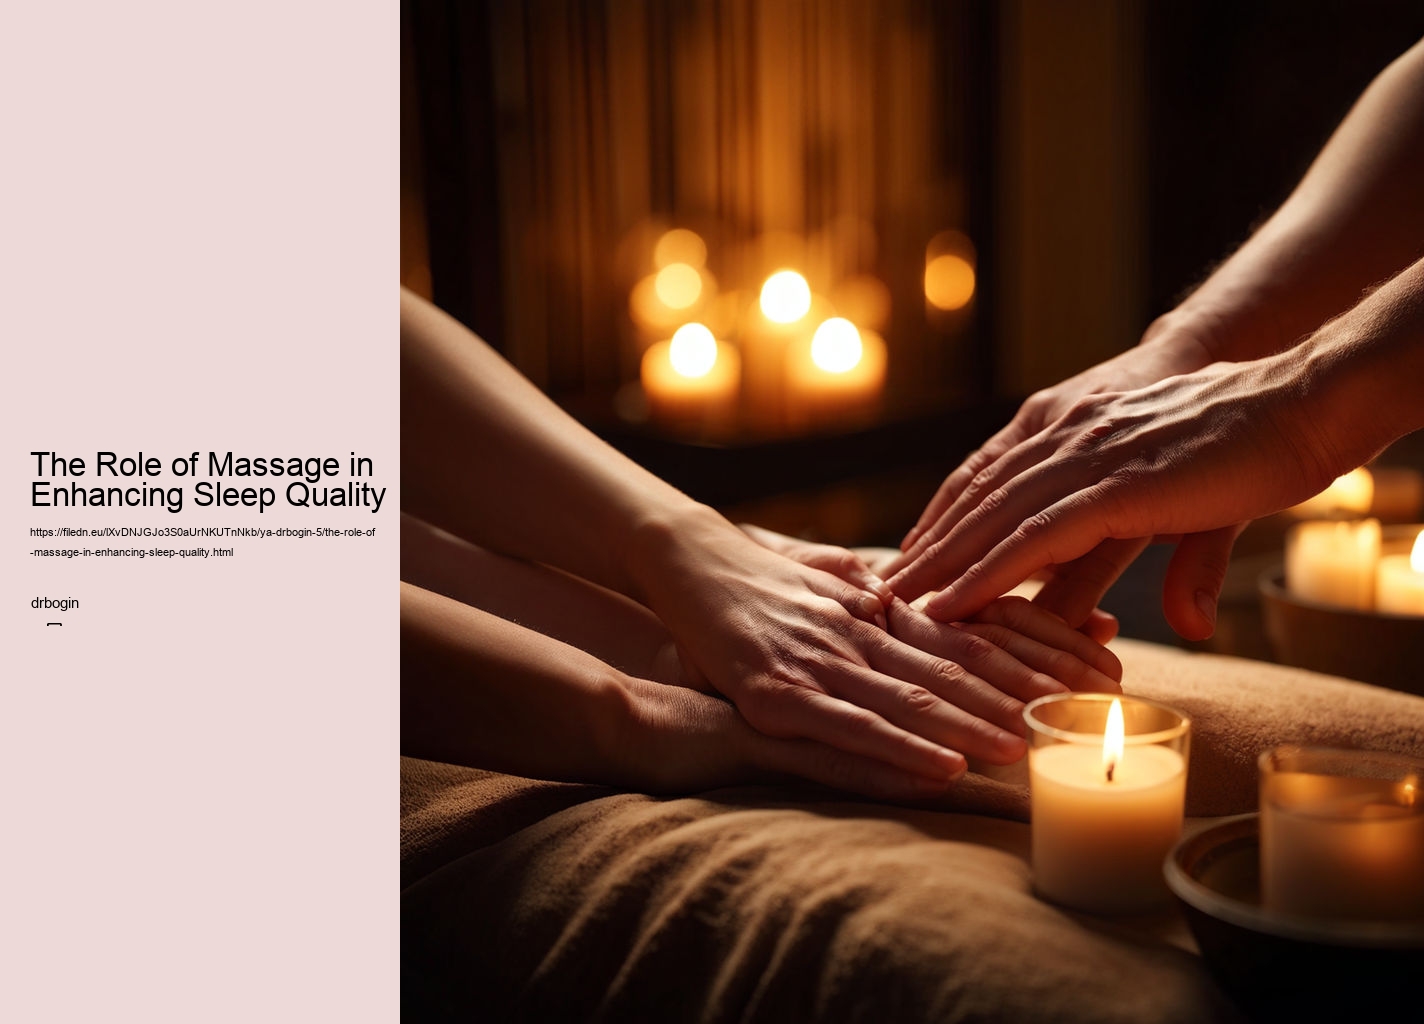 The Role of Massage in Enhancing Sleep Quality